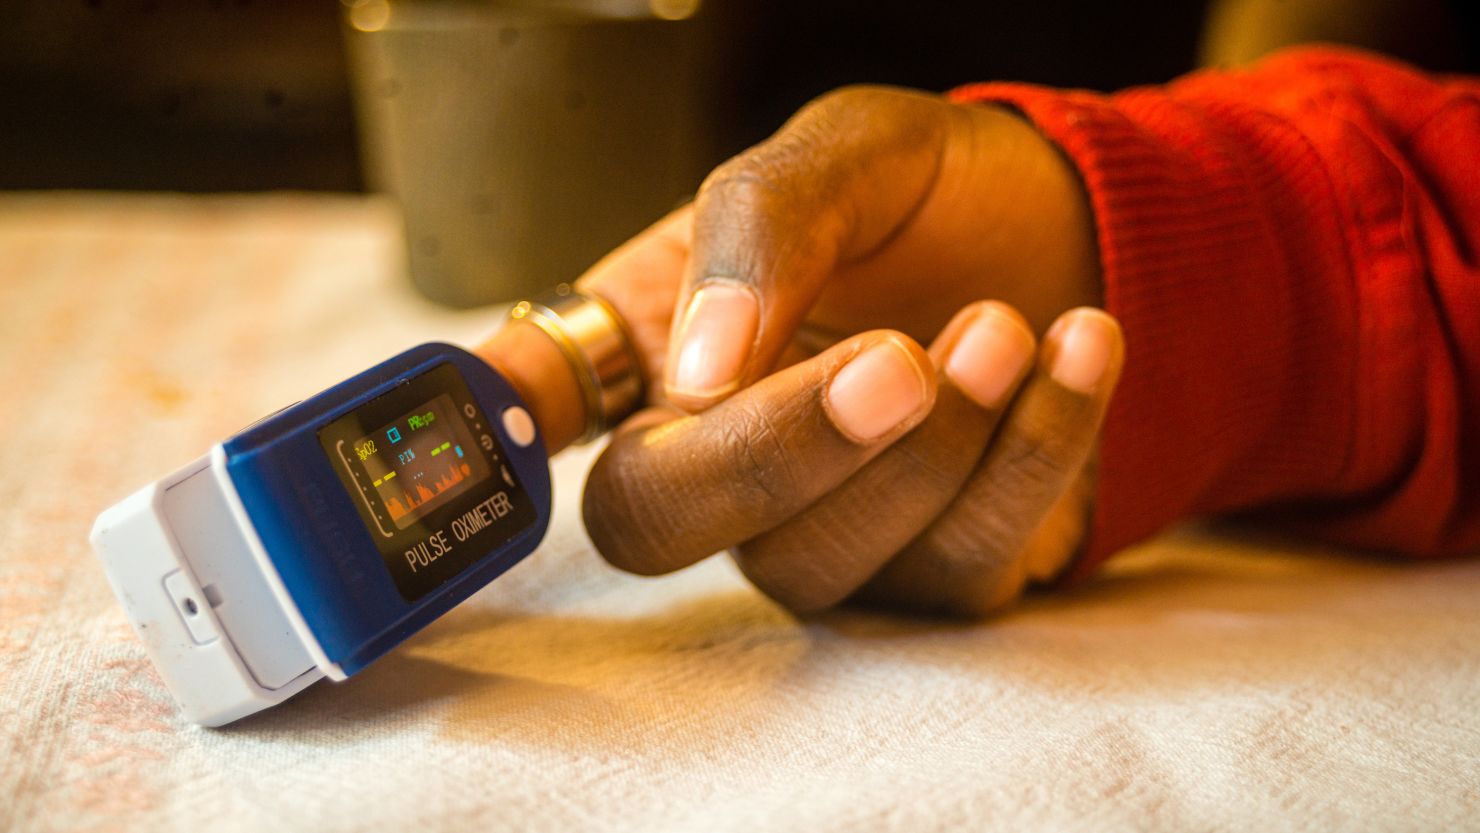 A closeup shot of a pulse oximeter on a black woman's finger to measure pulse rate and oxygen levels